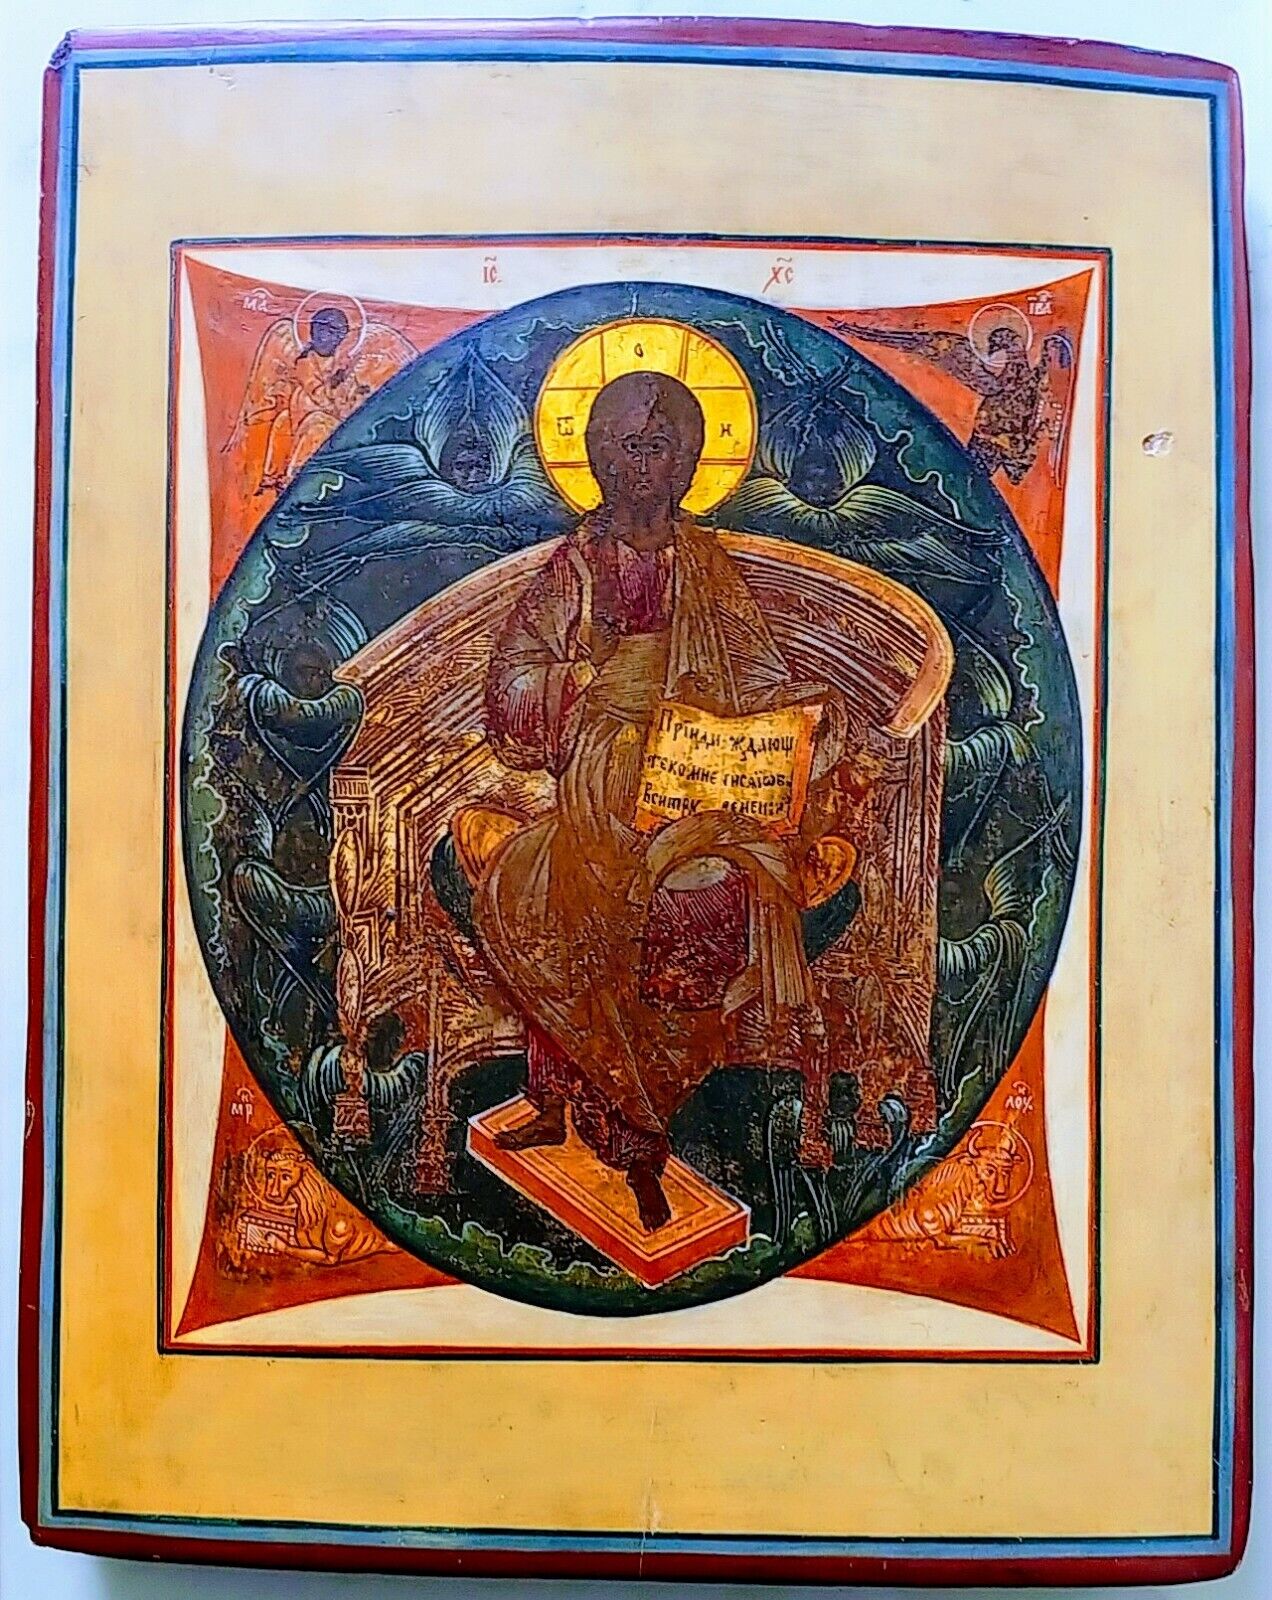 ANTIQUE 18c HAND PAINTED RUSSIAN ICON OF THE CHRIST SAVED IN STRENGH